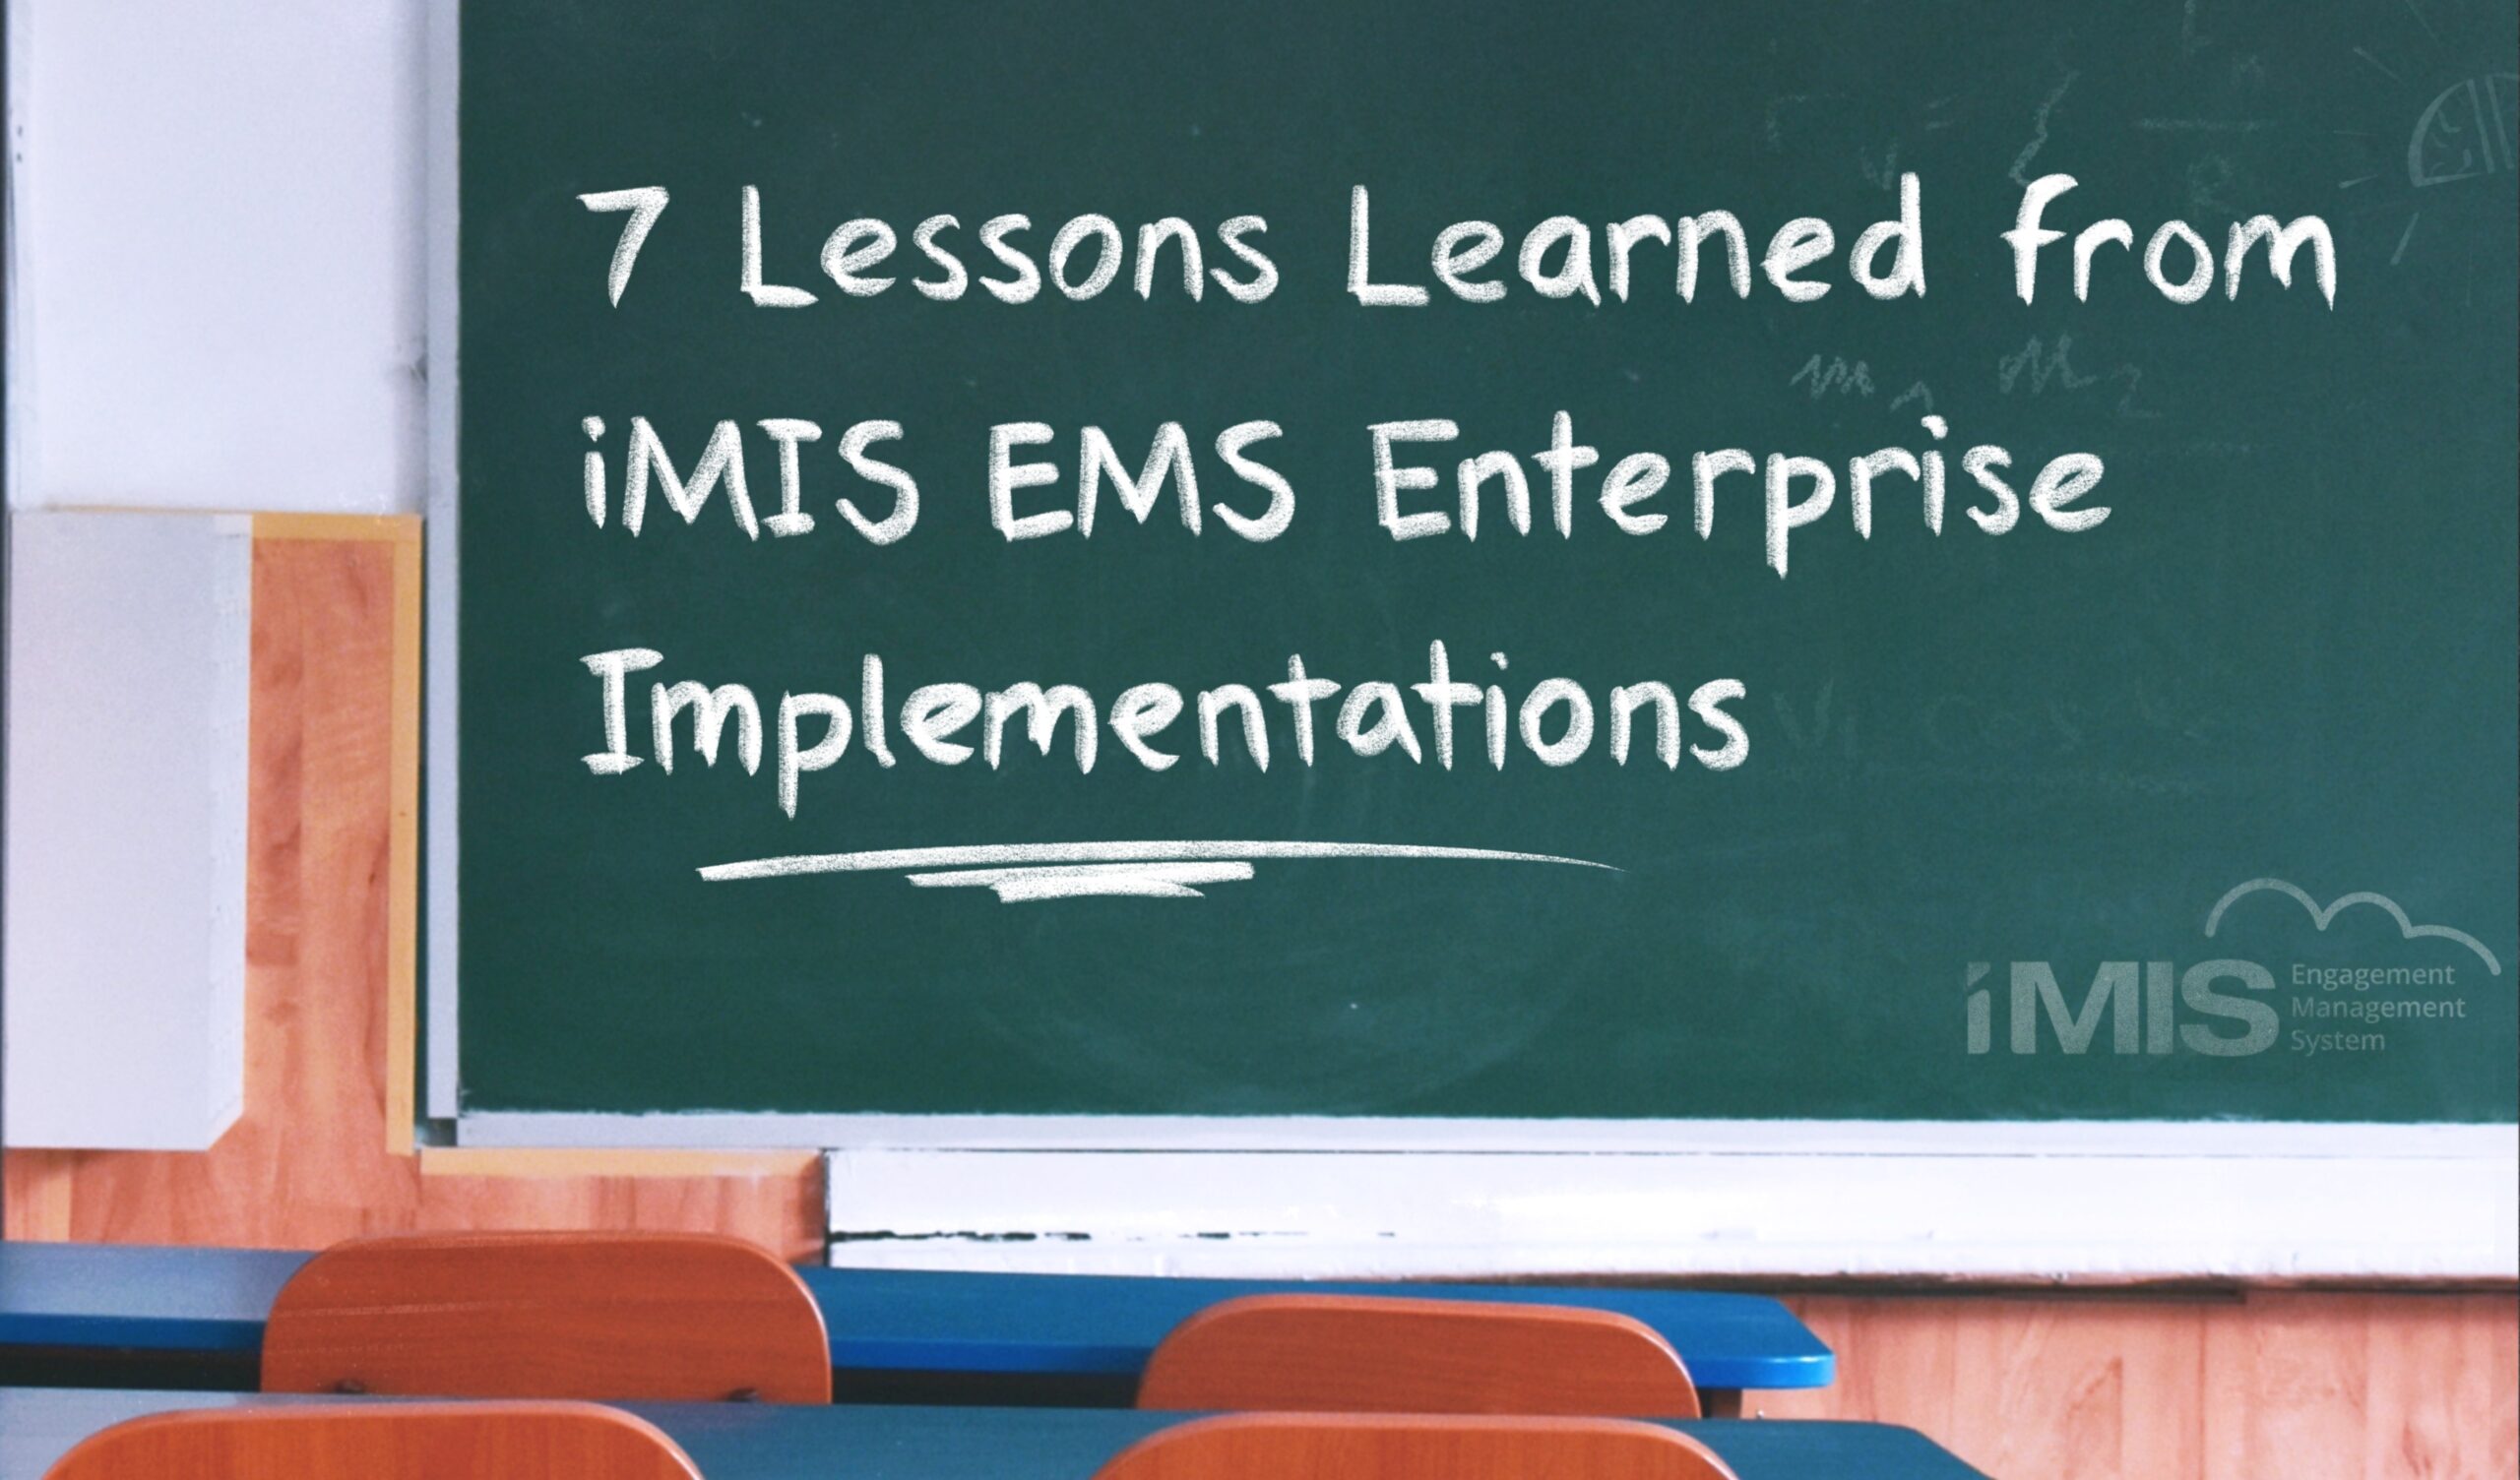 7 Lessons Learned from iMIS EMS Enterprise Implementations